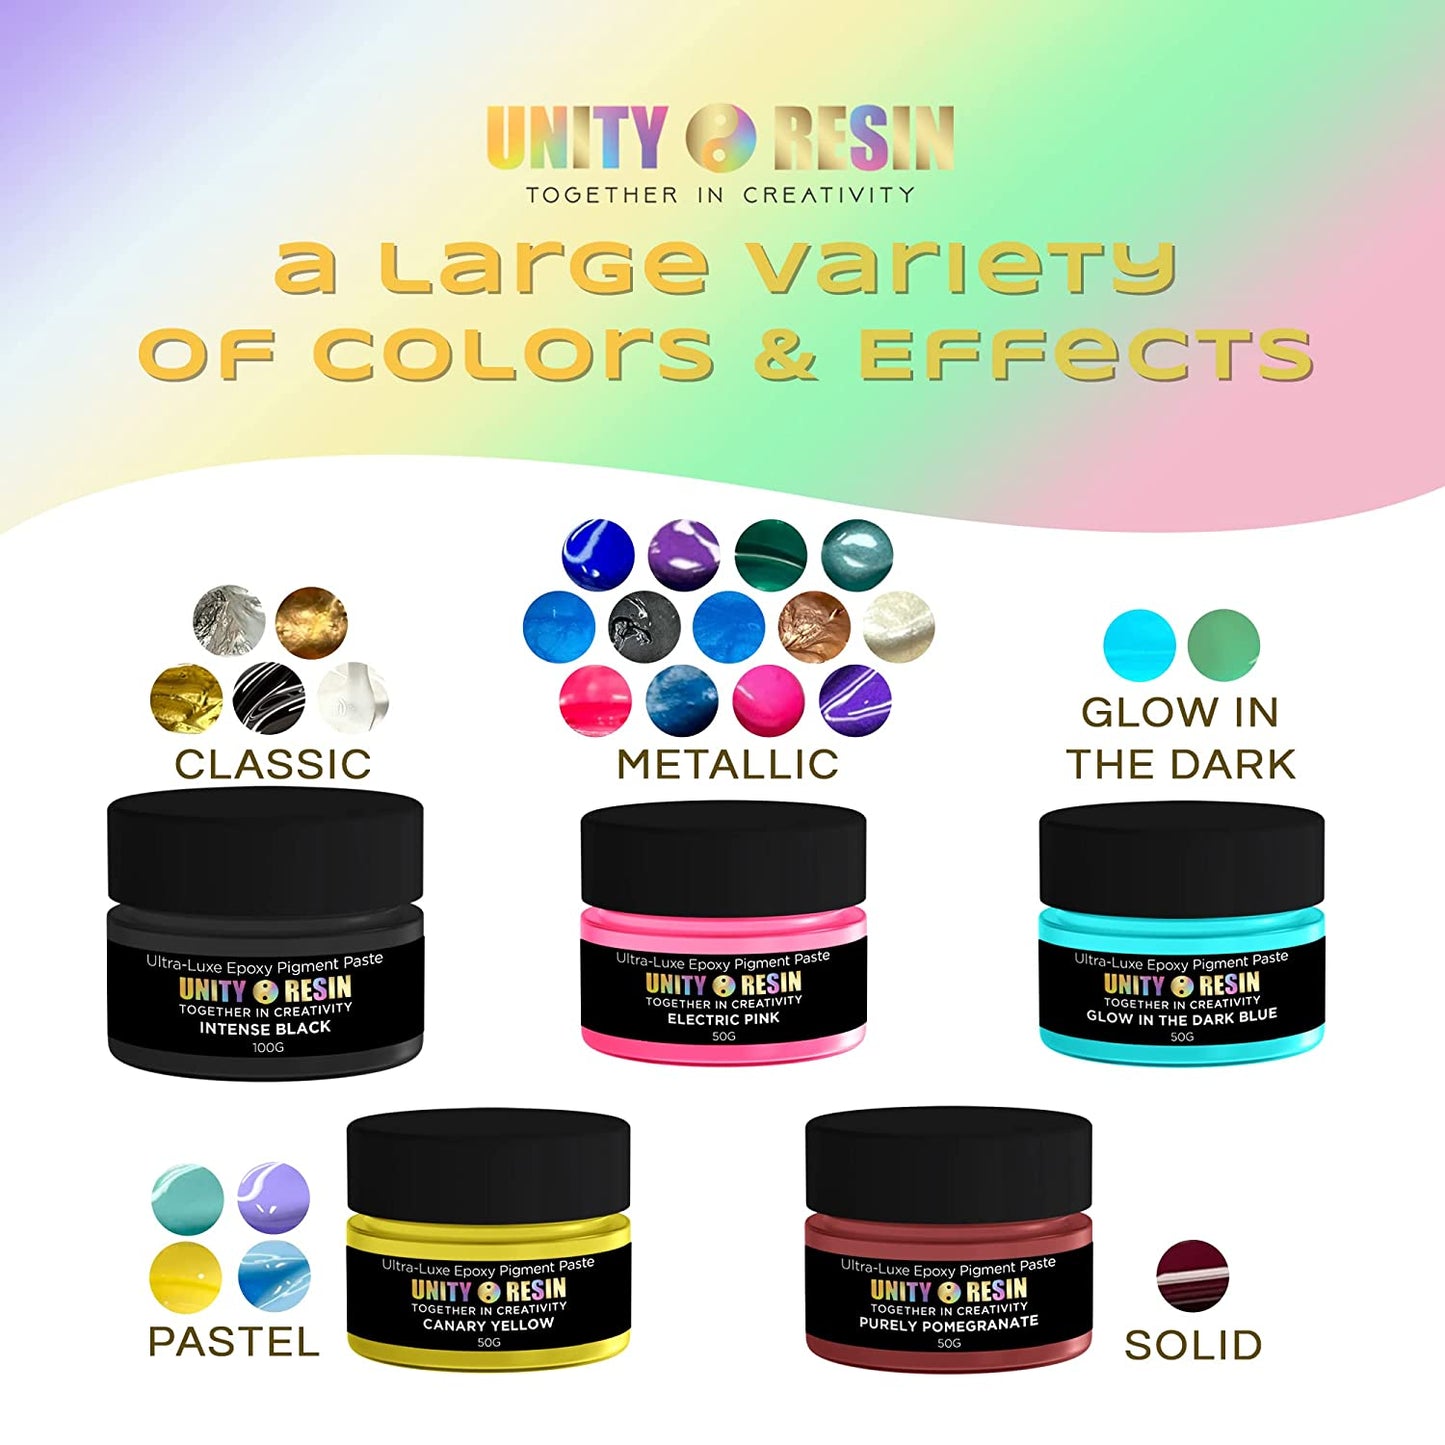 Ultra-Luxe Epoxy Resin Pigment Paste- RADIANT RED (50G).